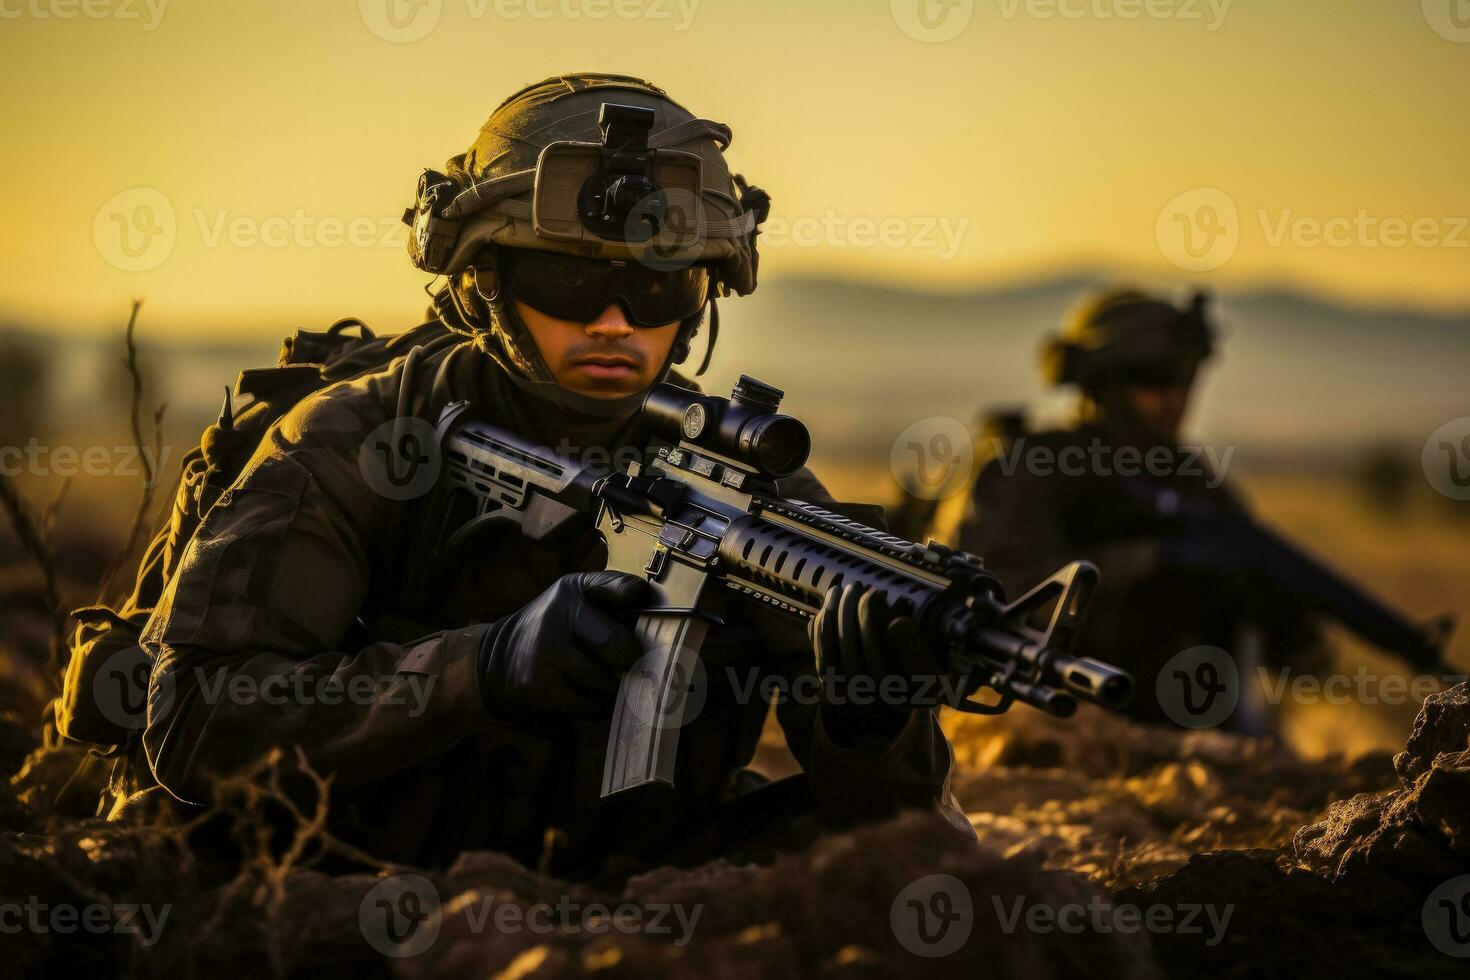 Israeli soldiers in active duty during military operations photo